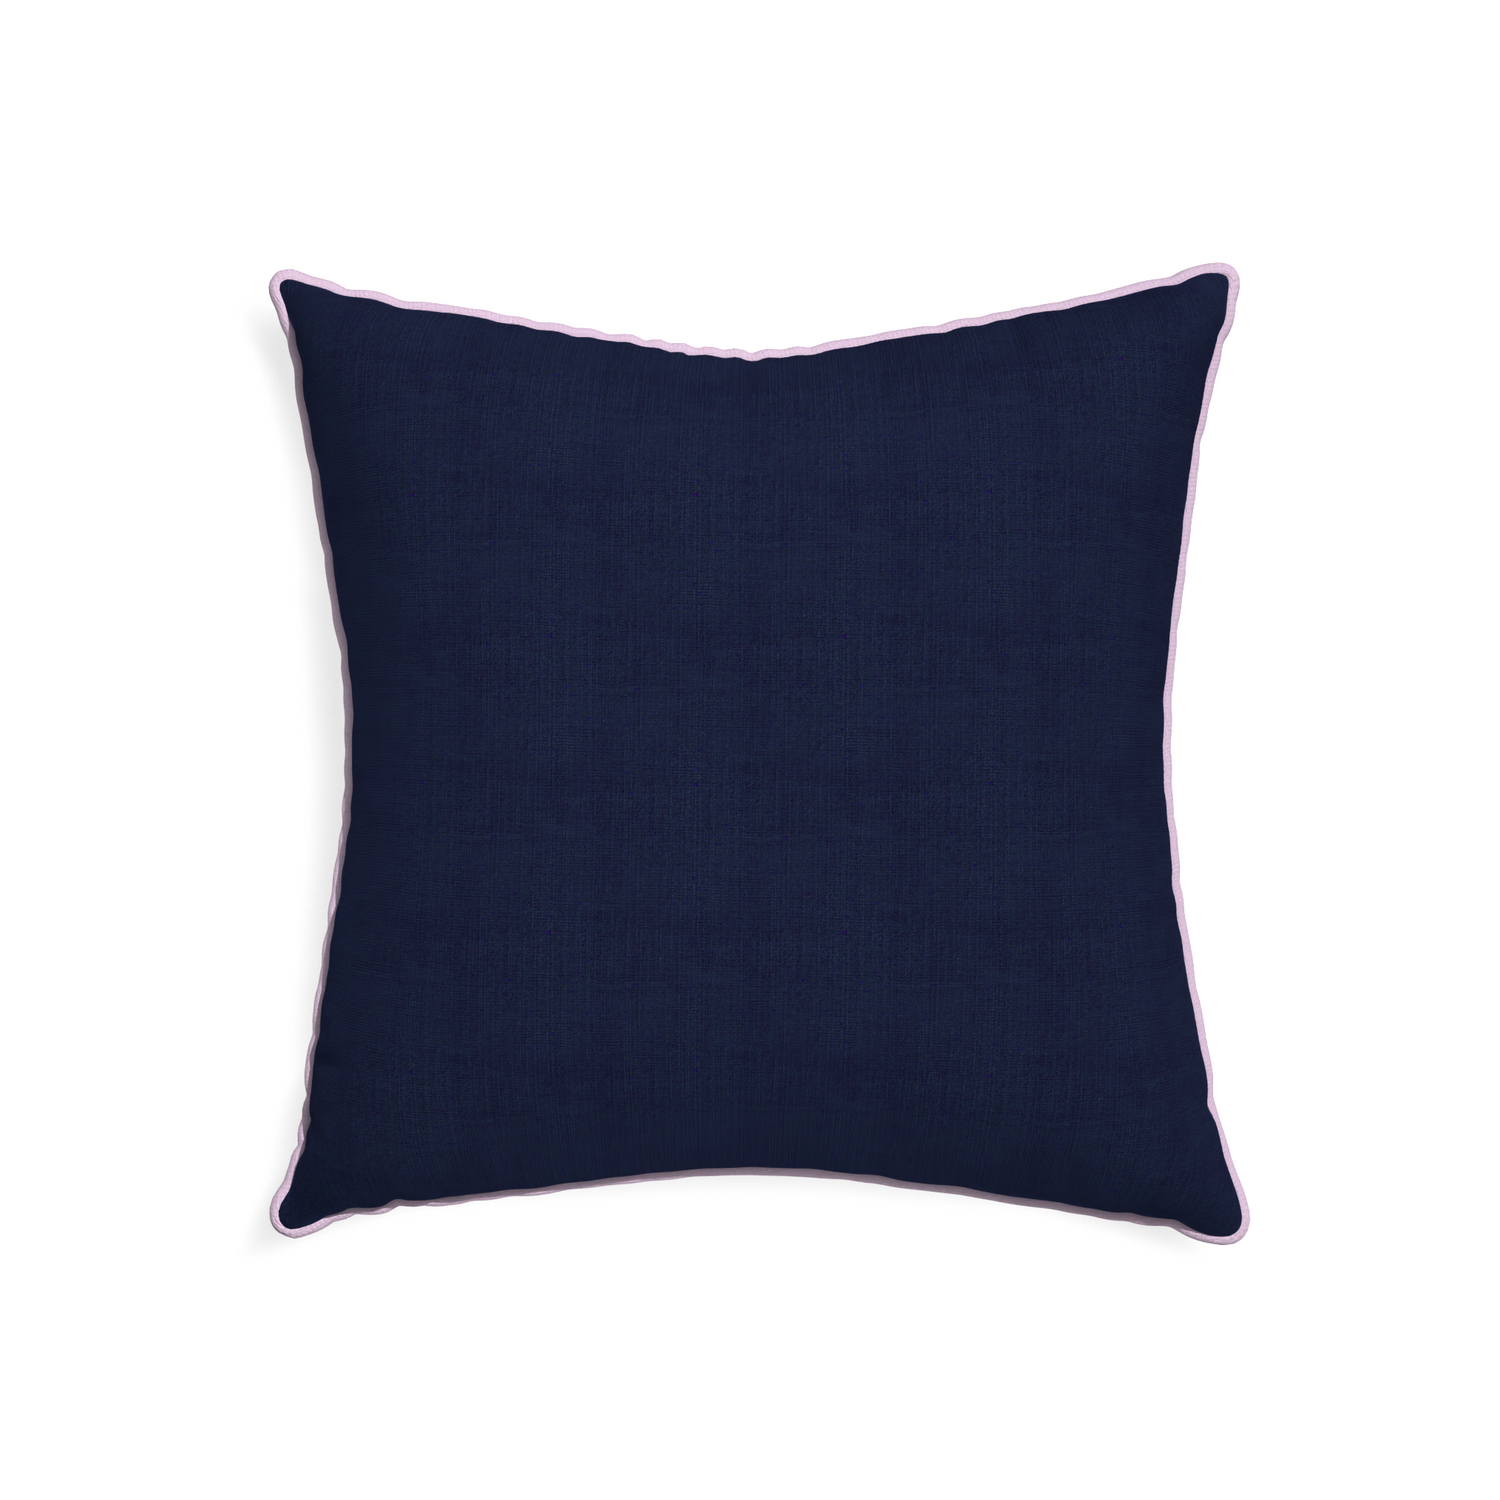 22-square midnight custom pillow with l piping on white background